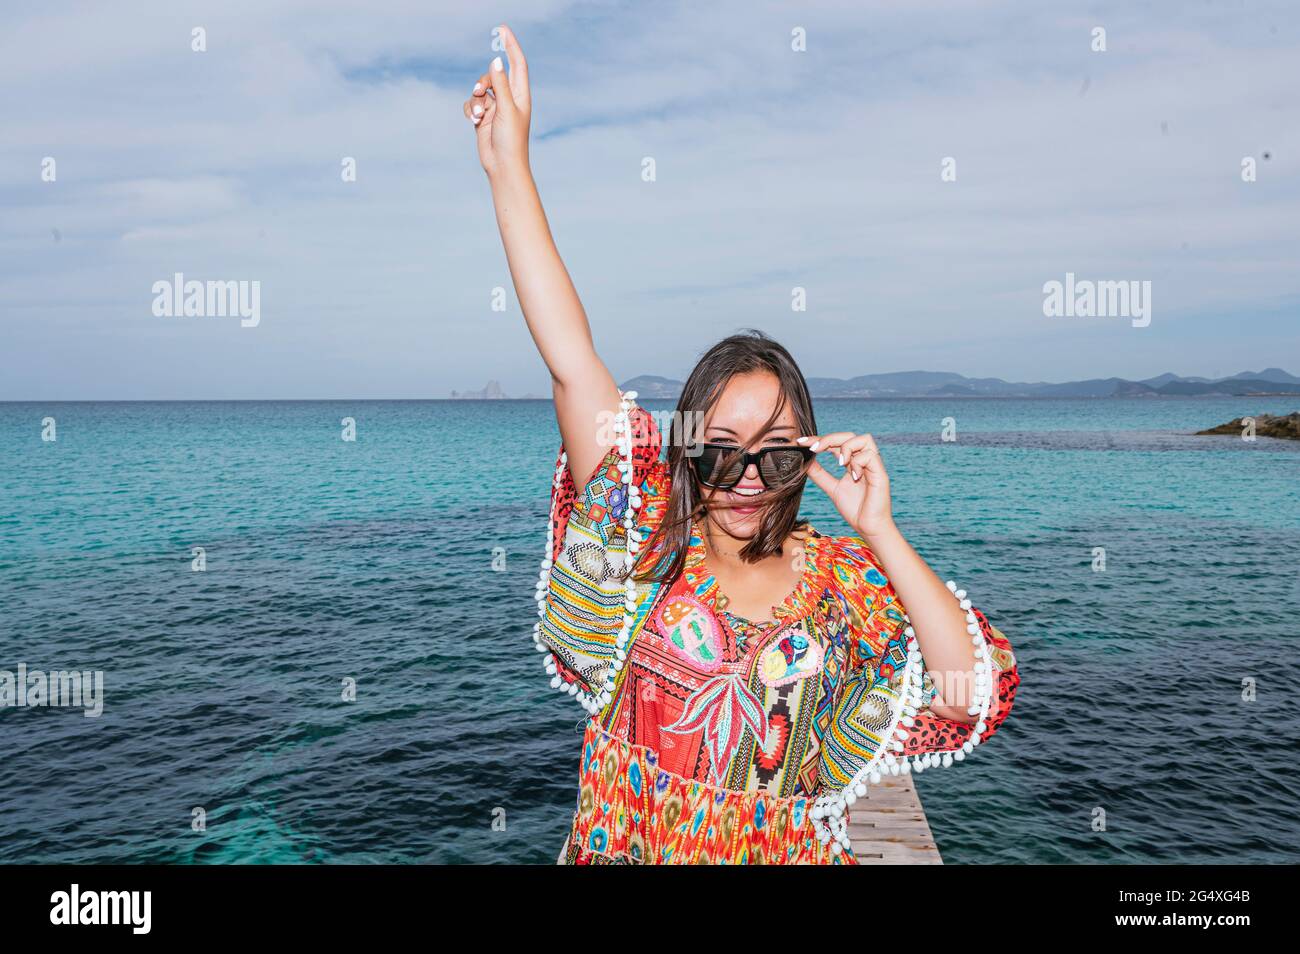 Cheerful woman with hand raised standing in front of water at Formentera island Stock Photo